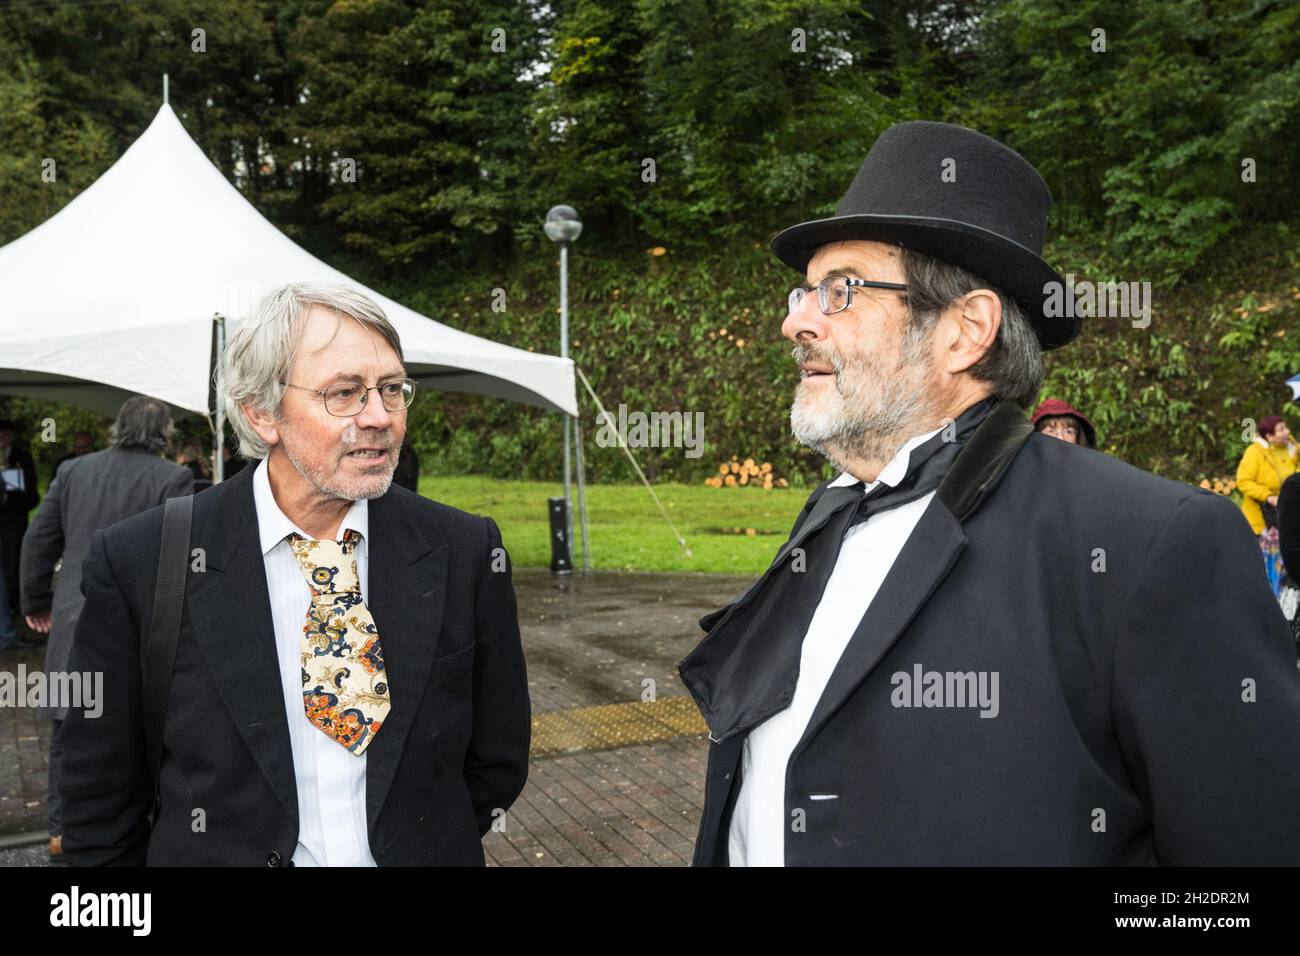 Costumed celebration marking 150 years of rail in Okehampton, Devon. Organiser Paul Vachon, chats to Victorian stationmaster played by Clive Charlton. Stock Photo